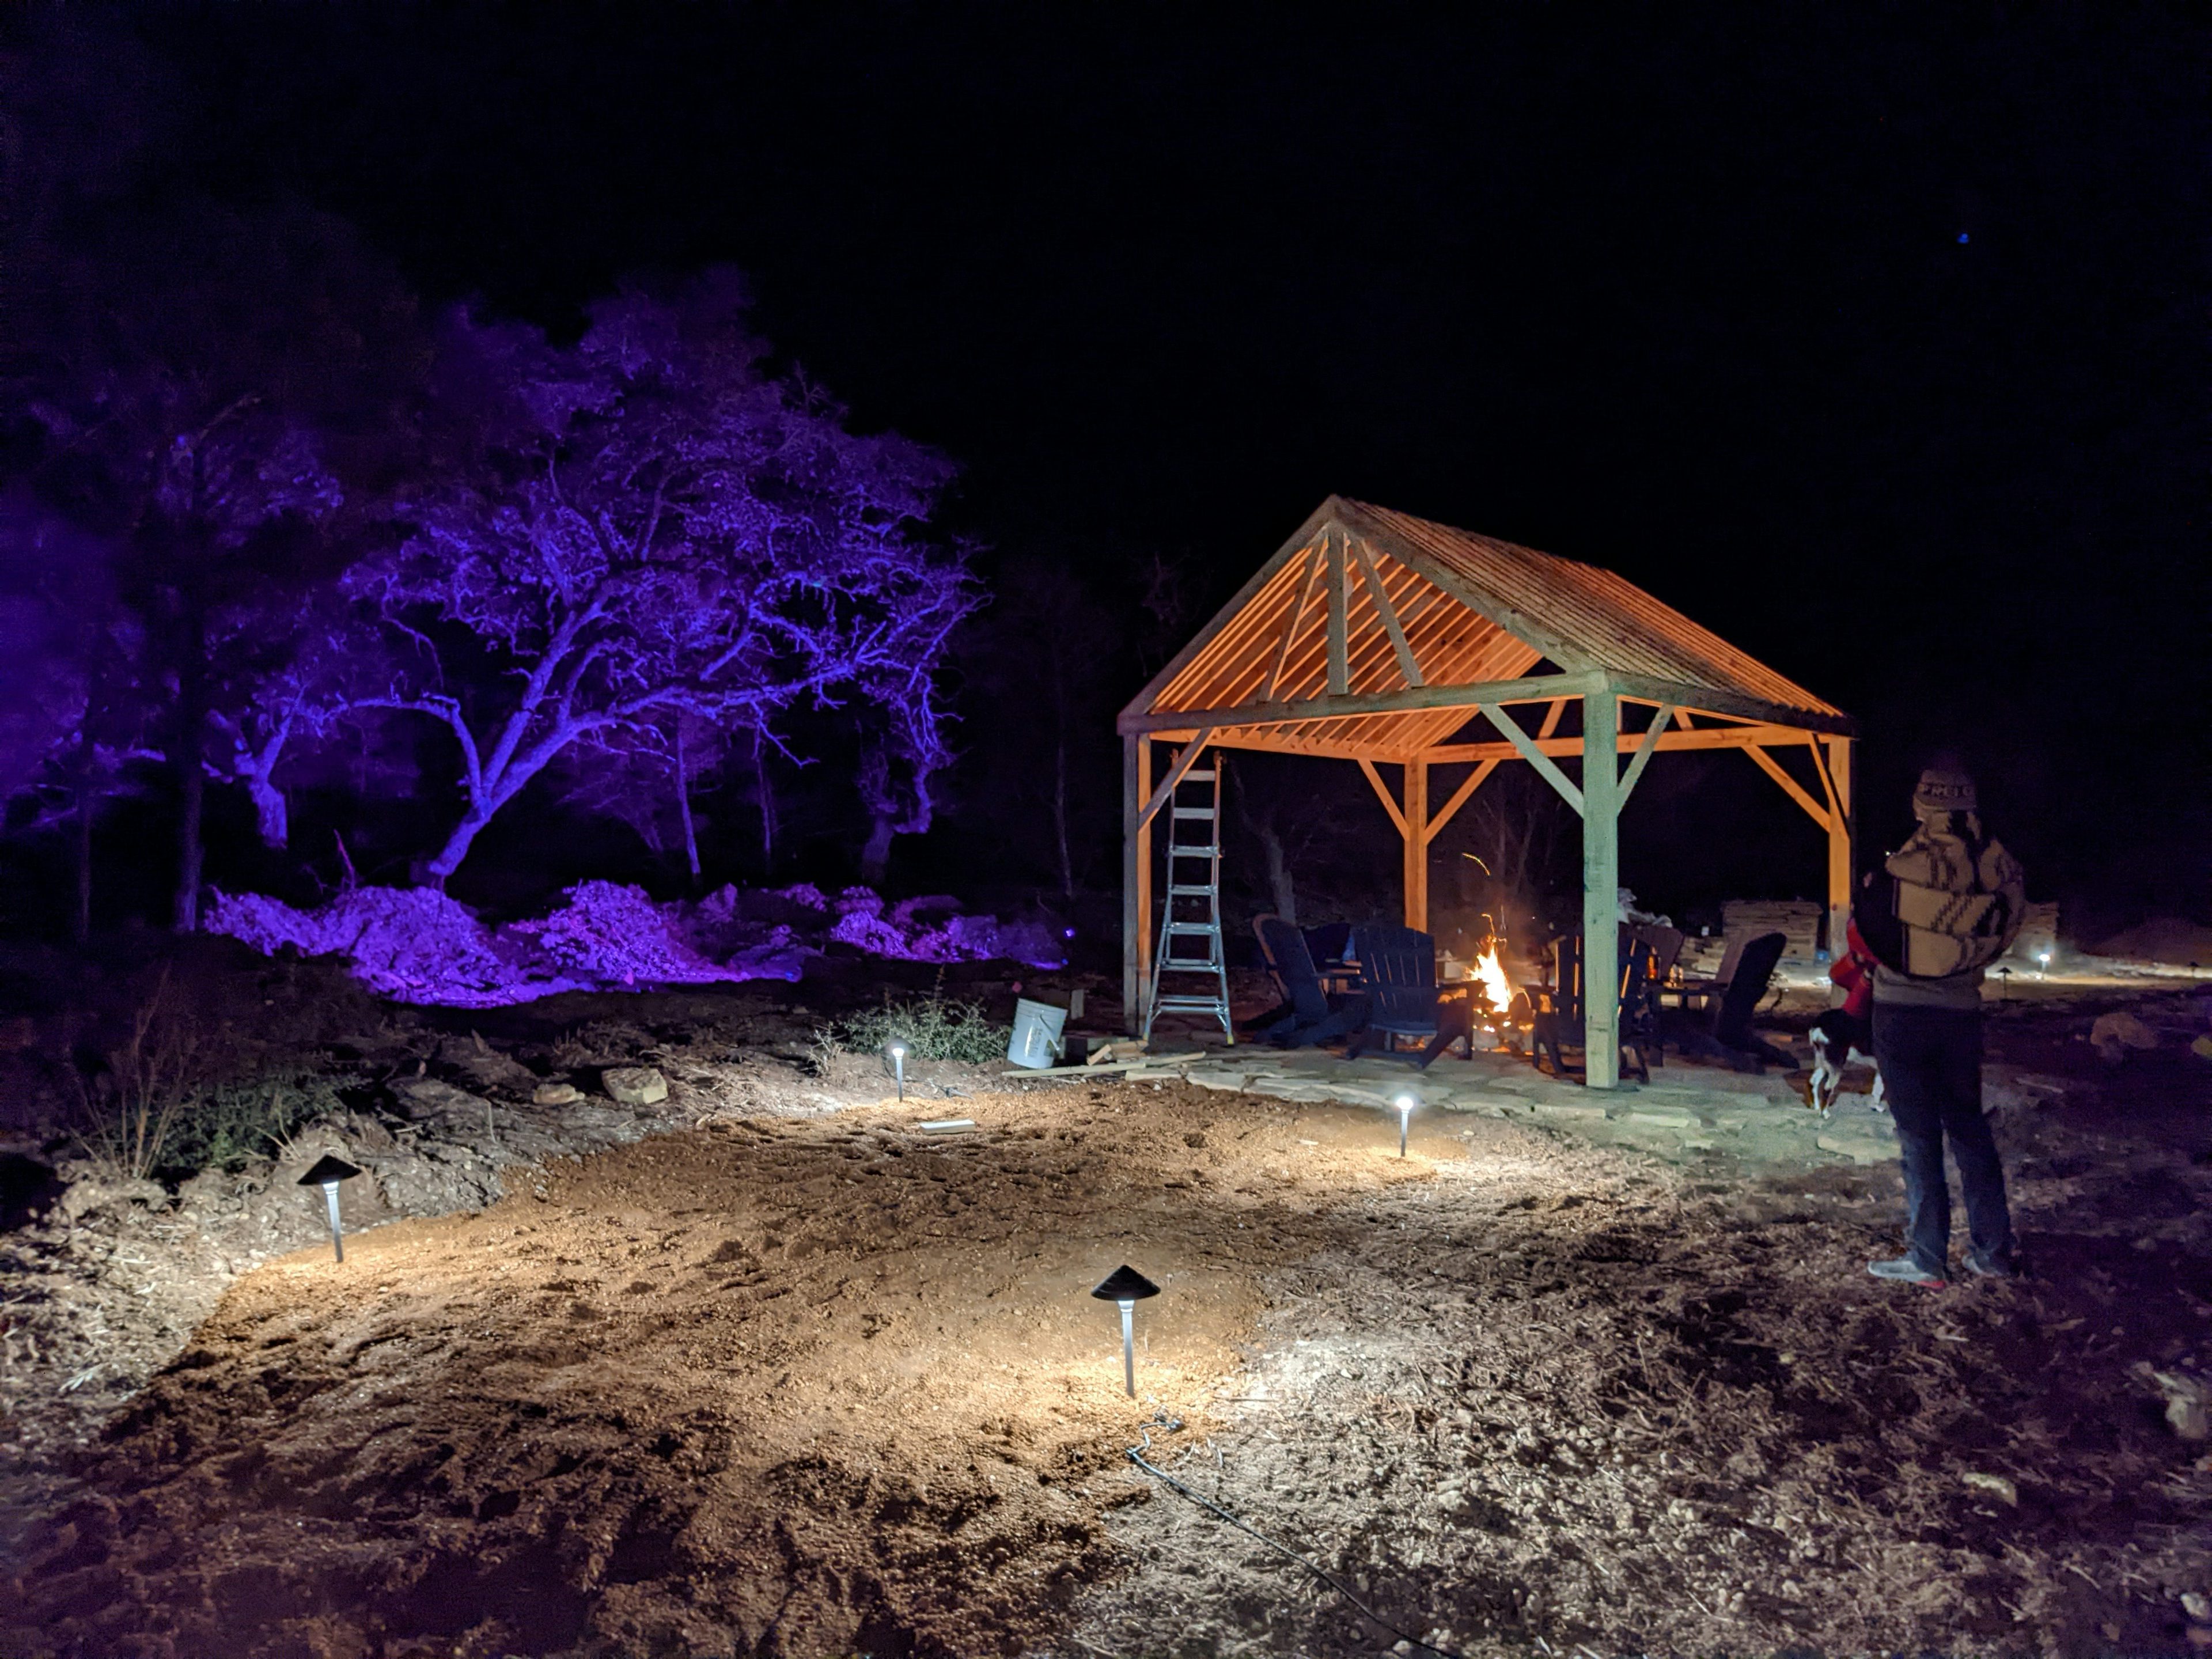 All the wood and lights we arranged